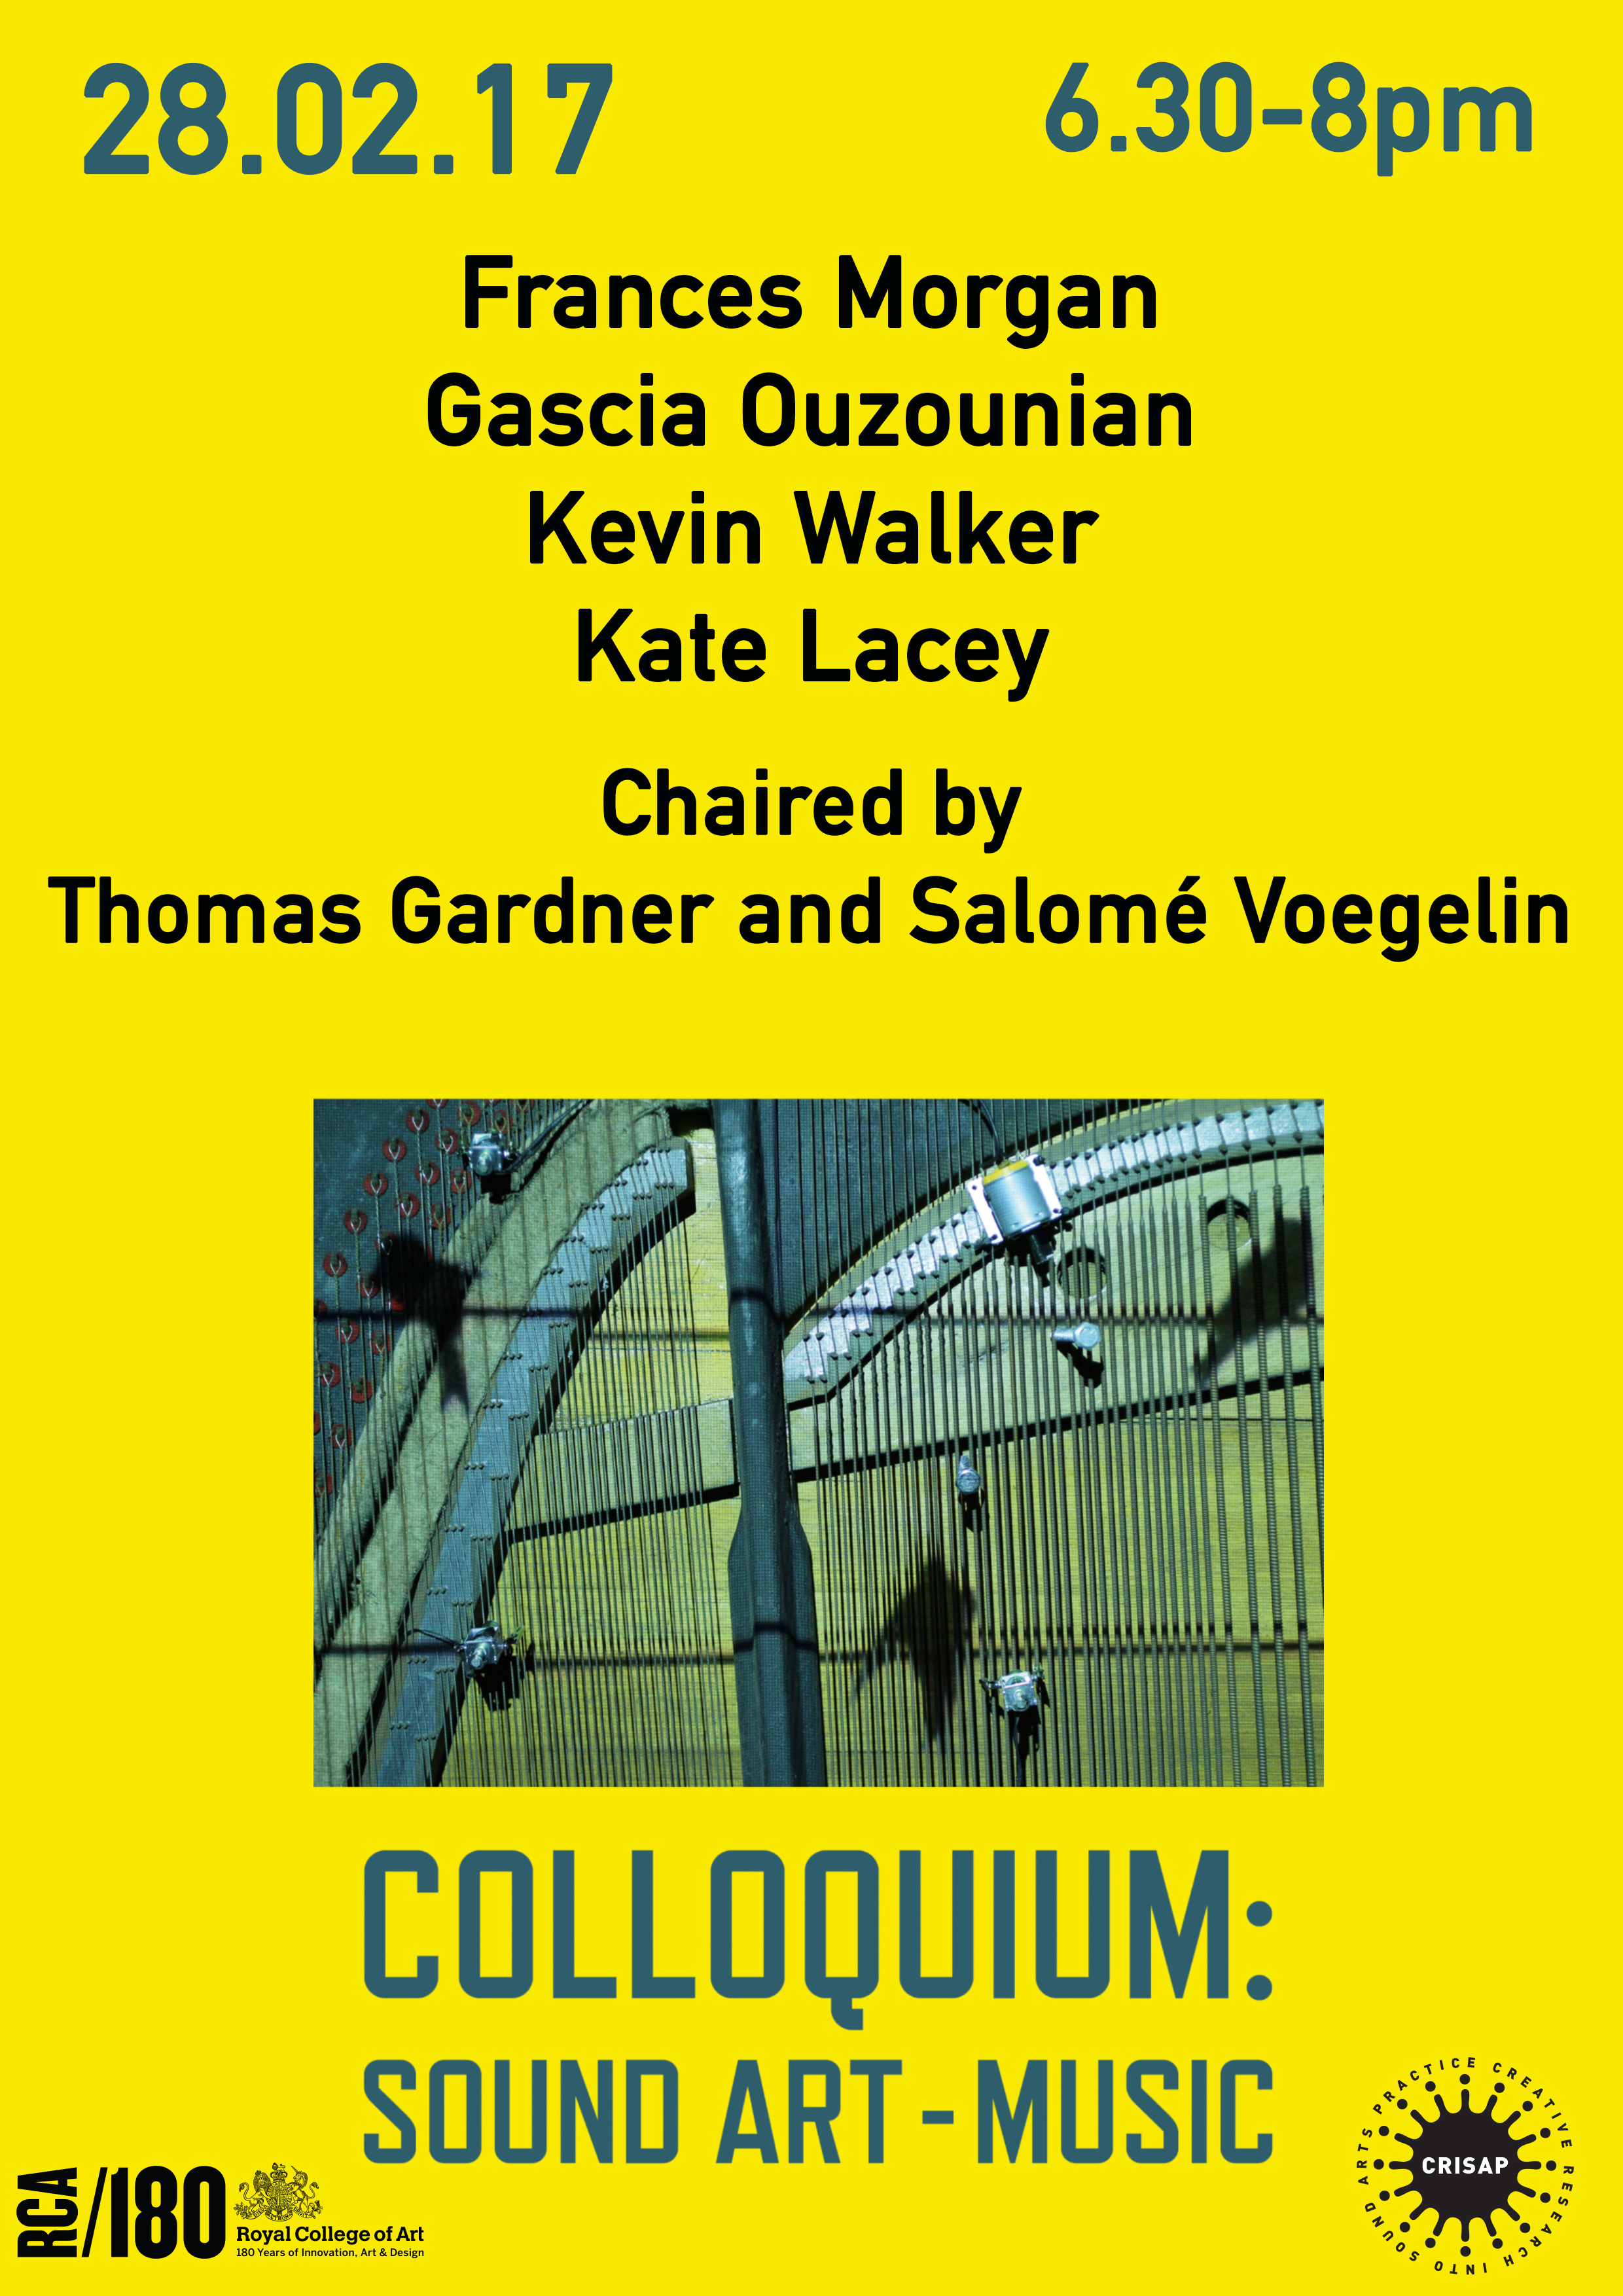 Poster - "Colloquium Sound Art - Music" launch event with logos, names and dates